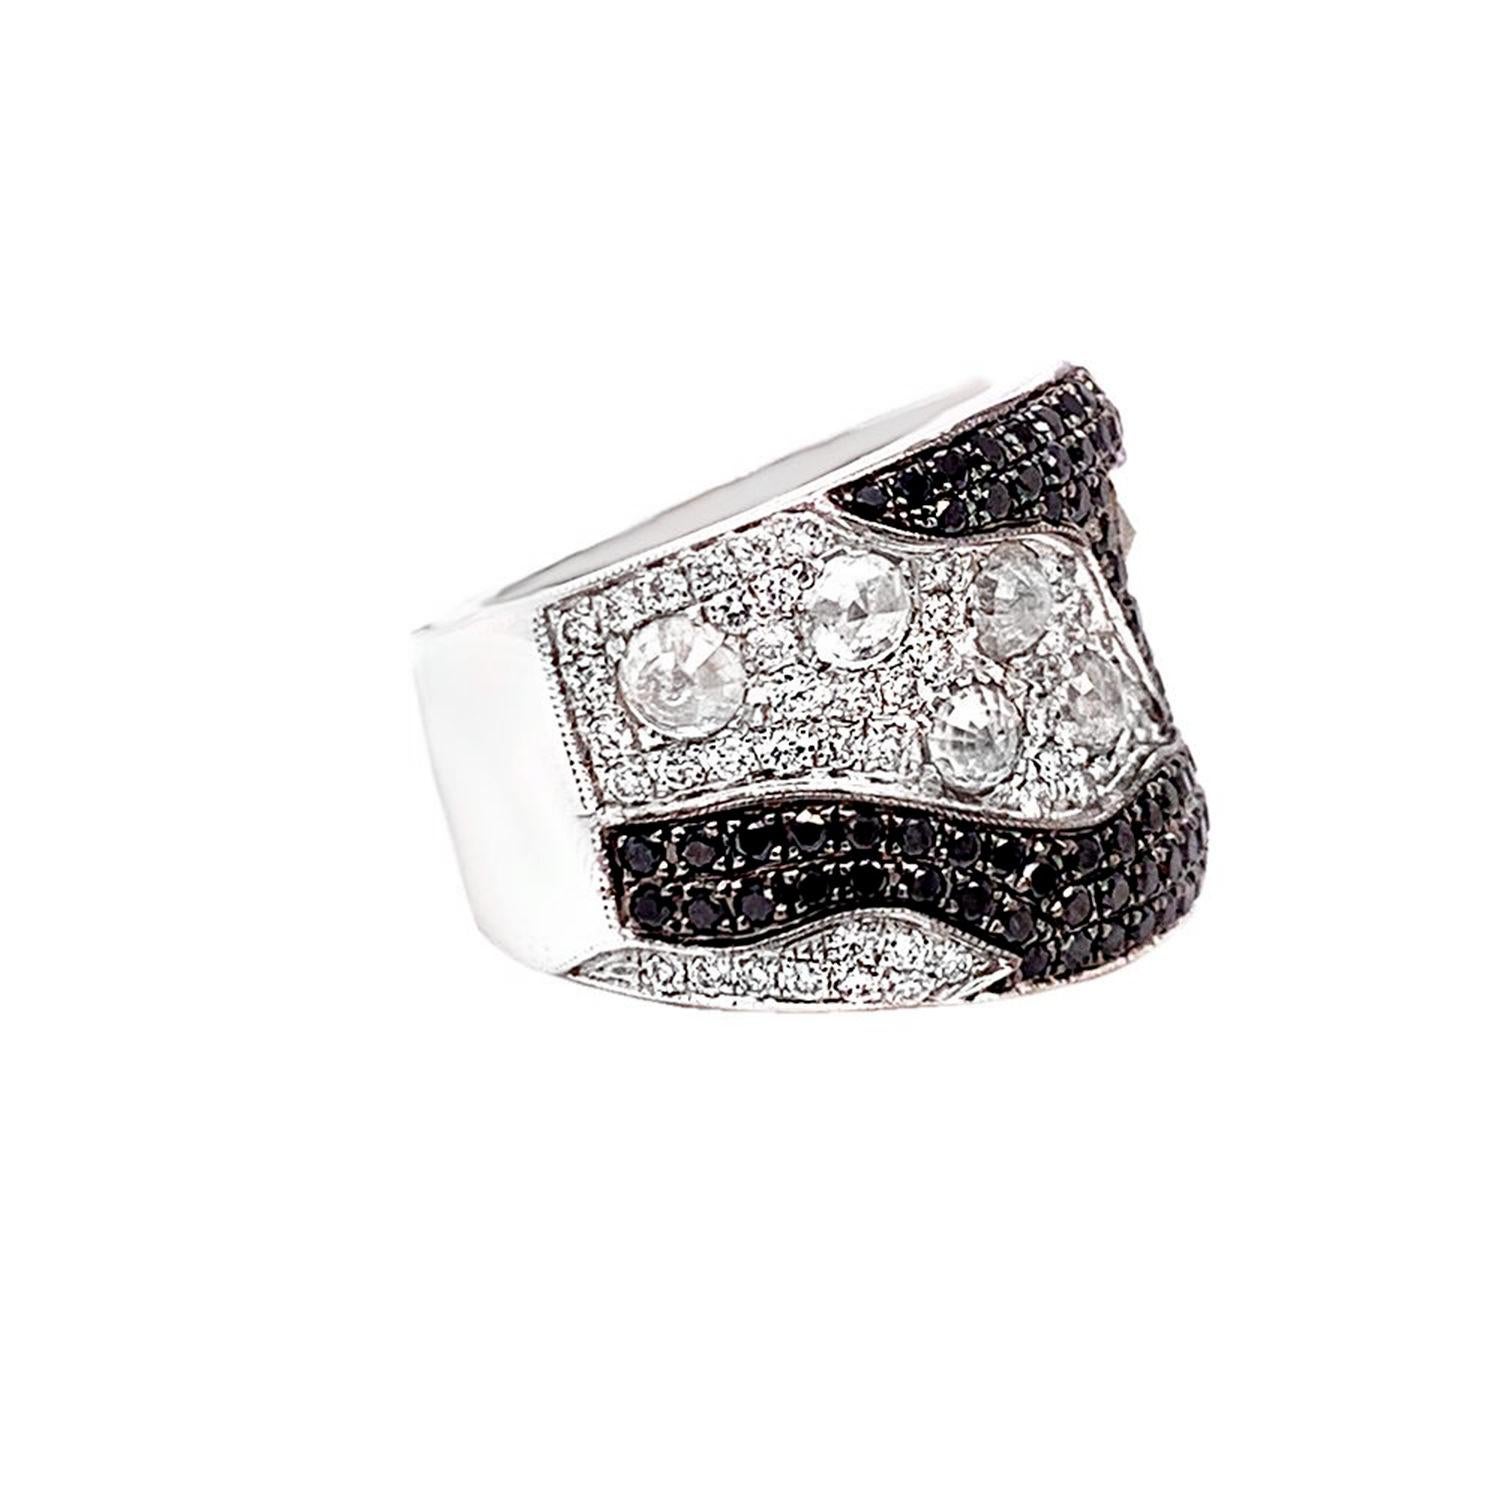 Round Cut Black And White Diamond Ring 3.37 Carats 18K White Gold For Sale